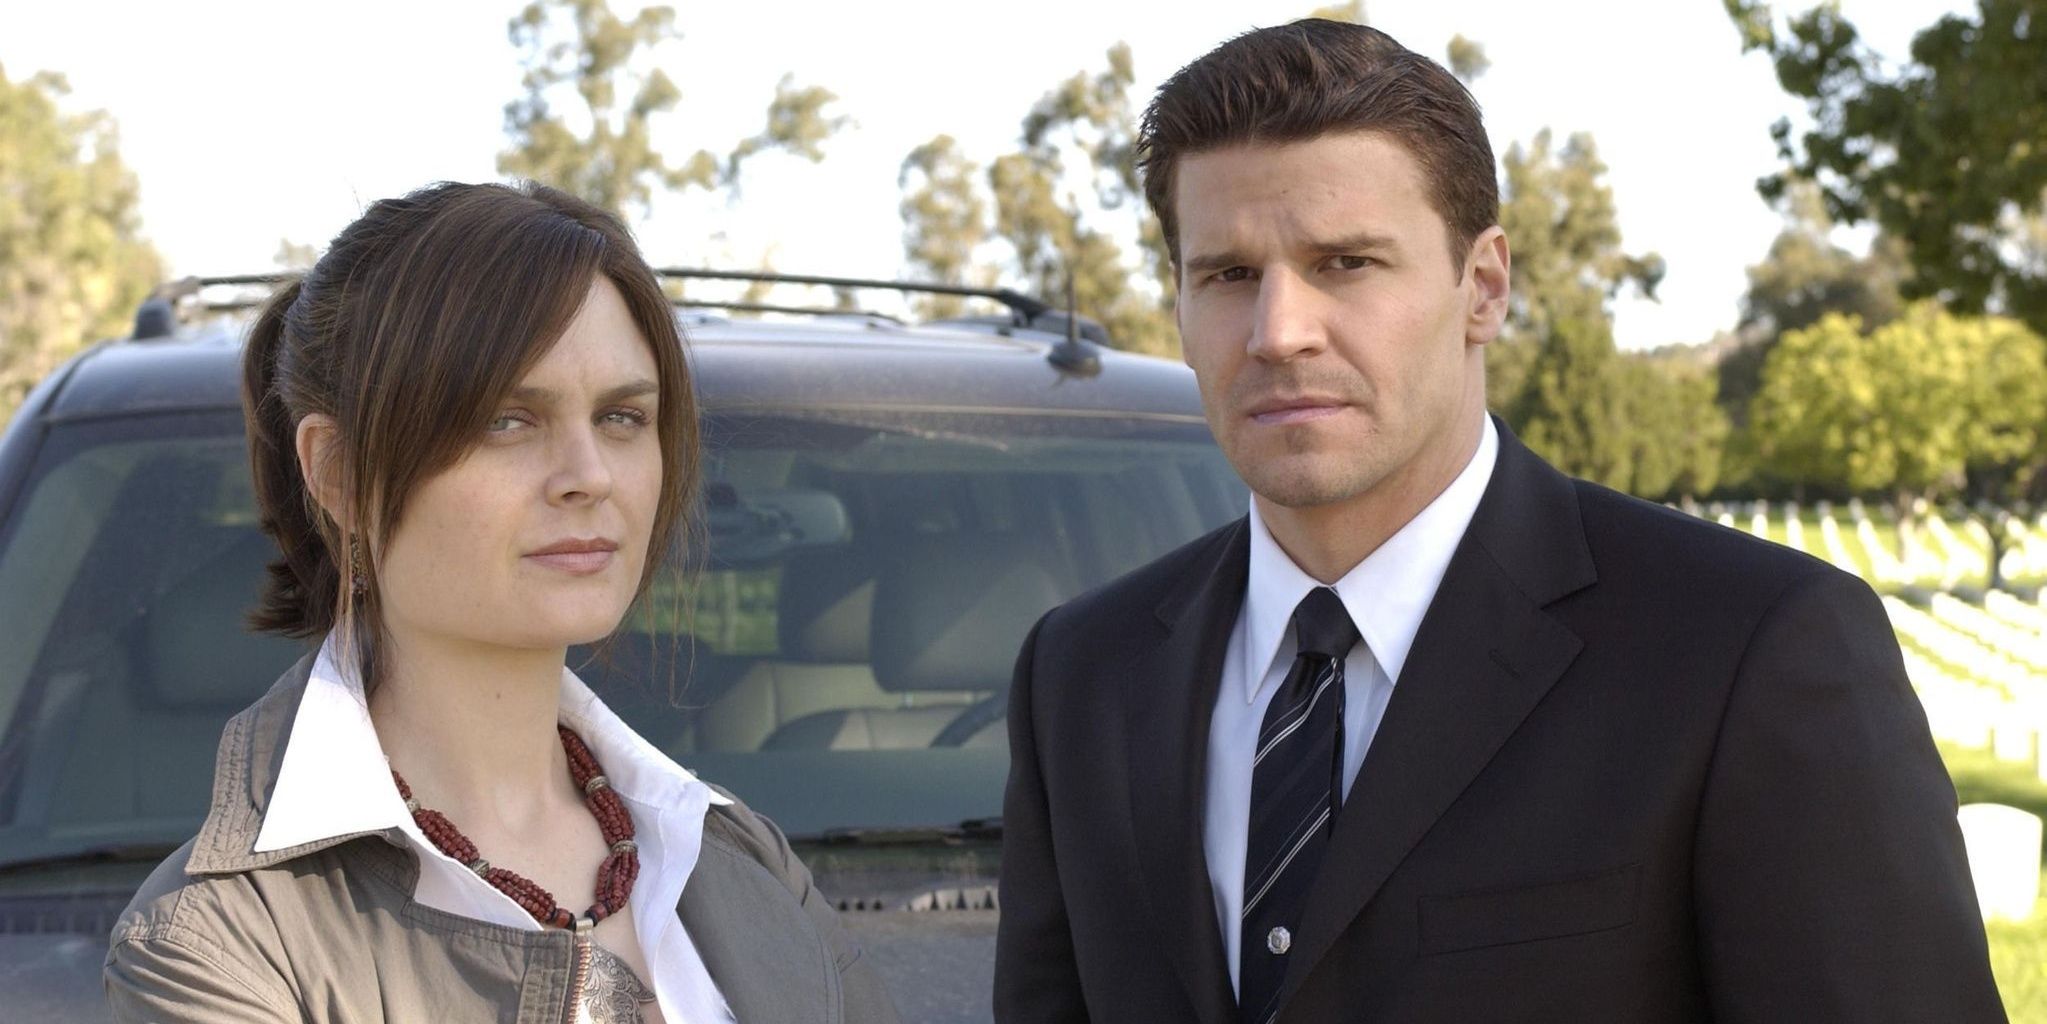 Booth and Brennan posing in front of a car in season 1